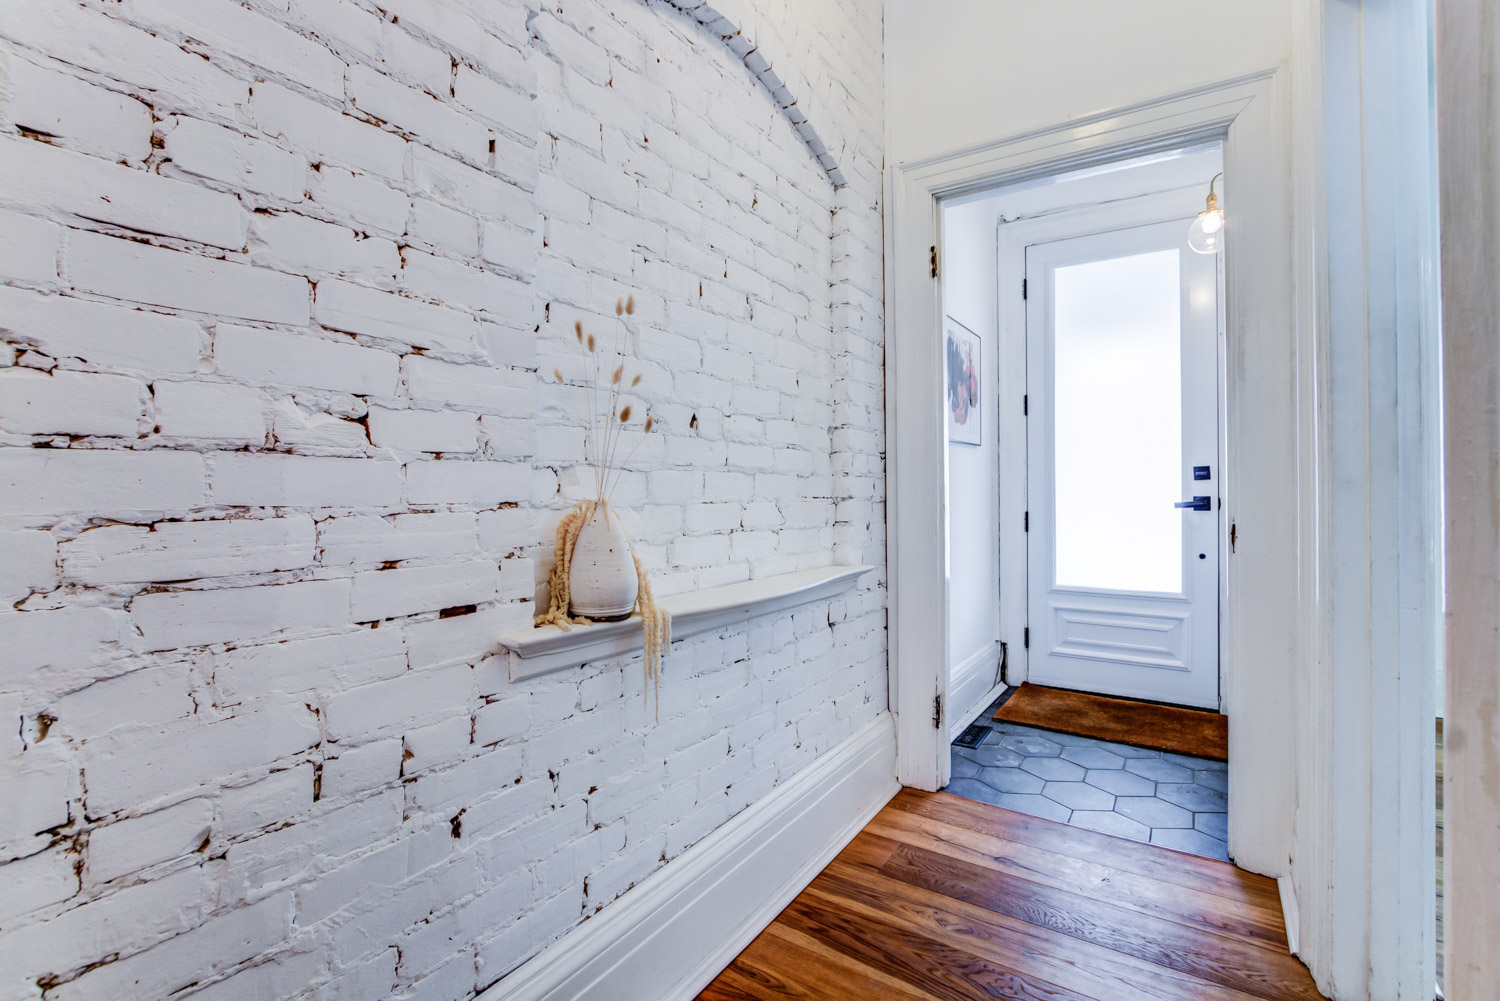 Exposed brick painted white in the front foyer